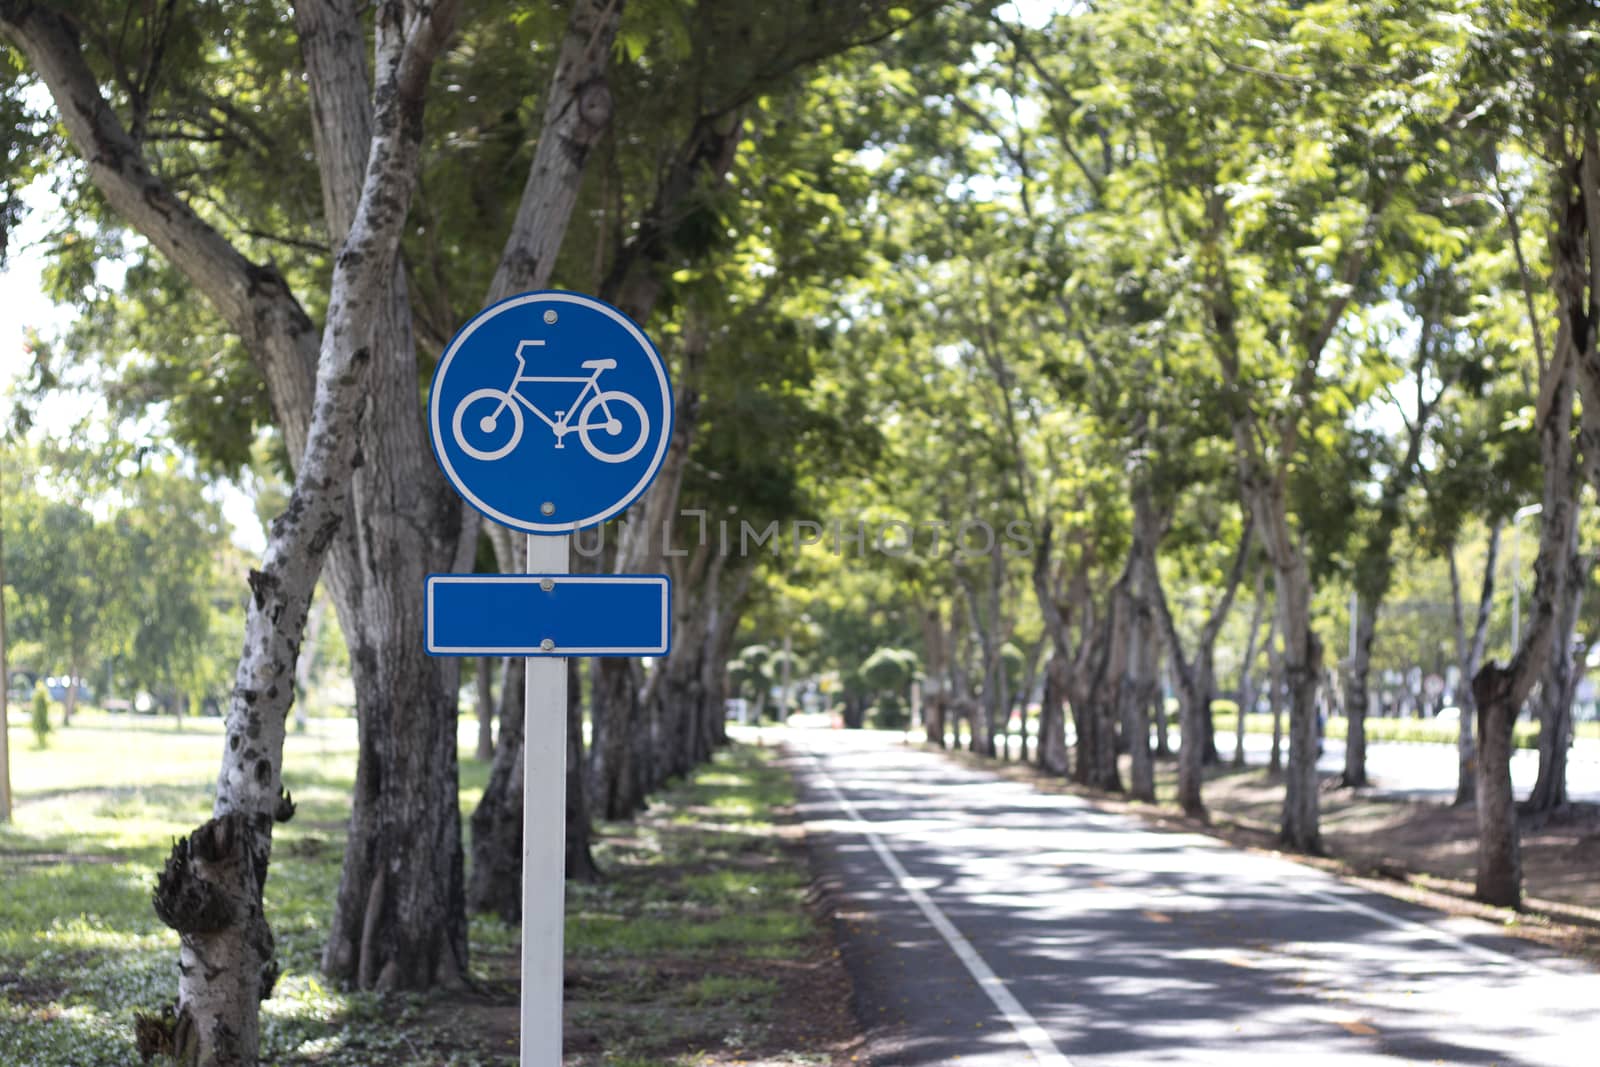 Signboard showing bike lane in a park. by Eungsuwat